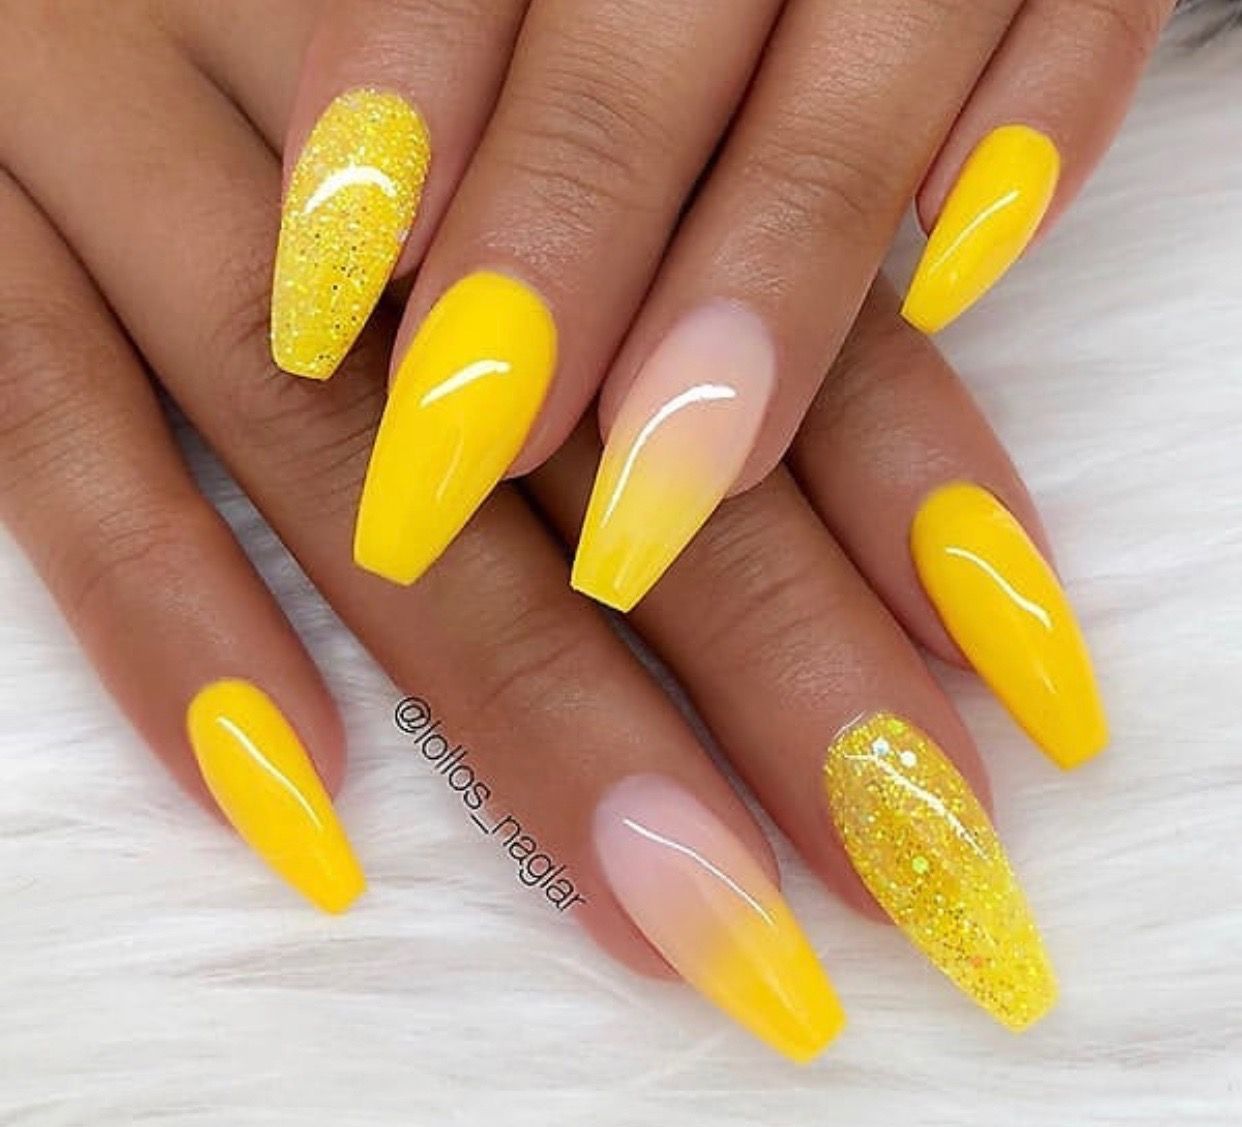 Vibrant Yellow. 1 70+ Most Popular Gel Nail Colors - 18